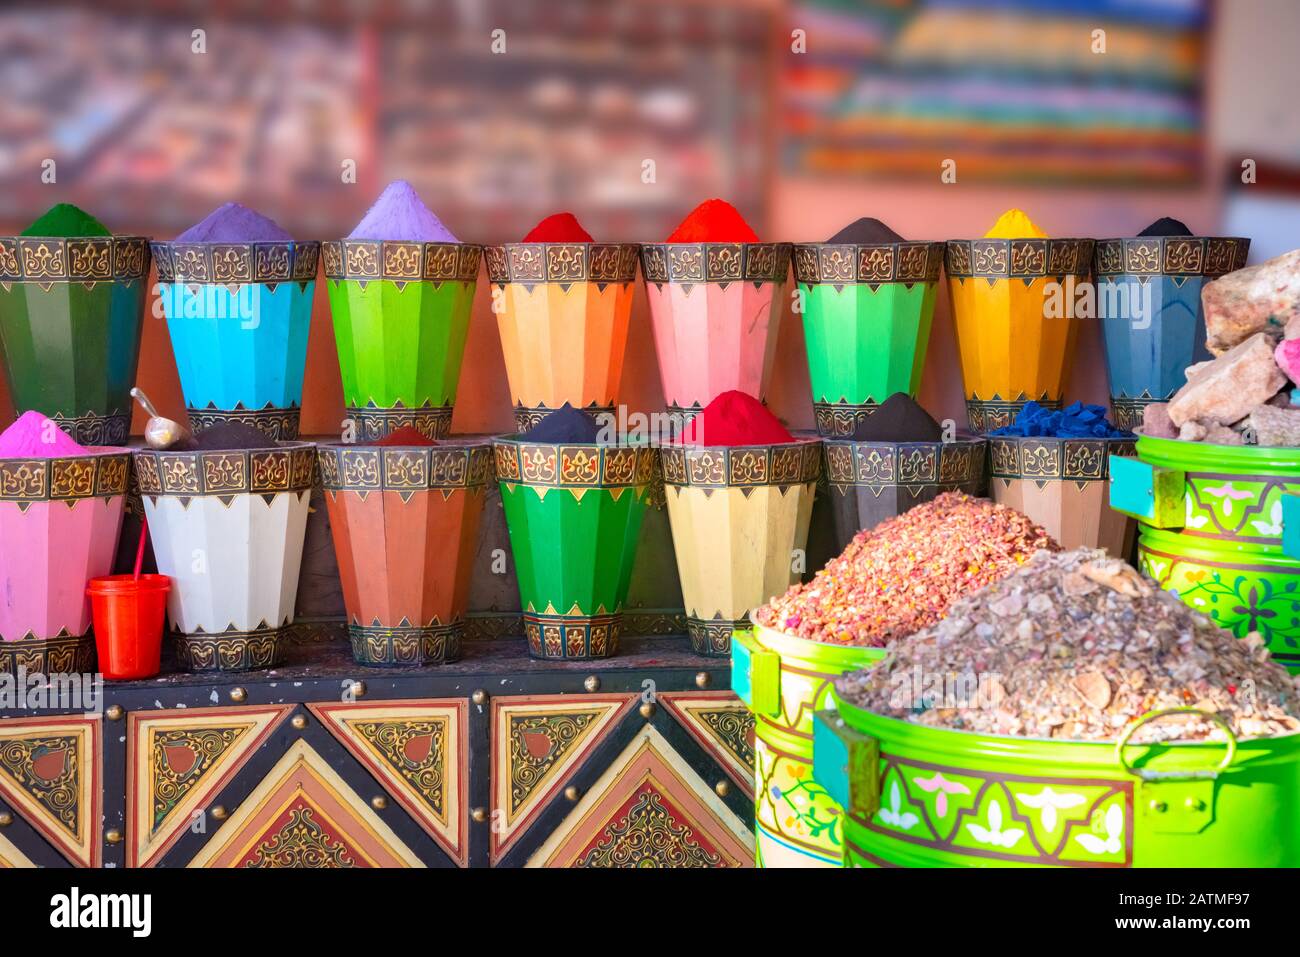 Spices and herbs being sold on street stal at Marrakech traditional market, Morocco. Stock Photo